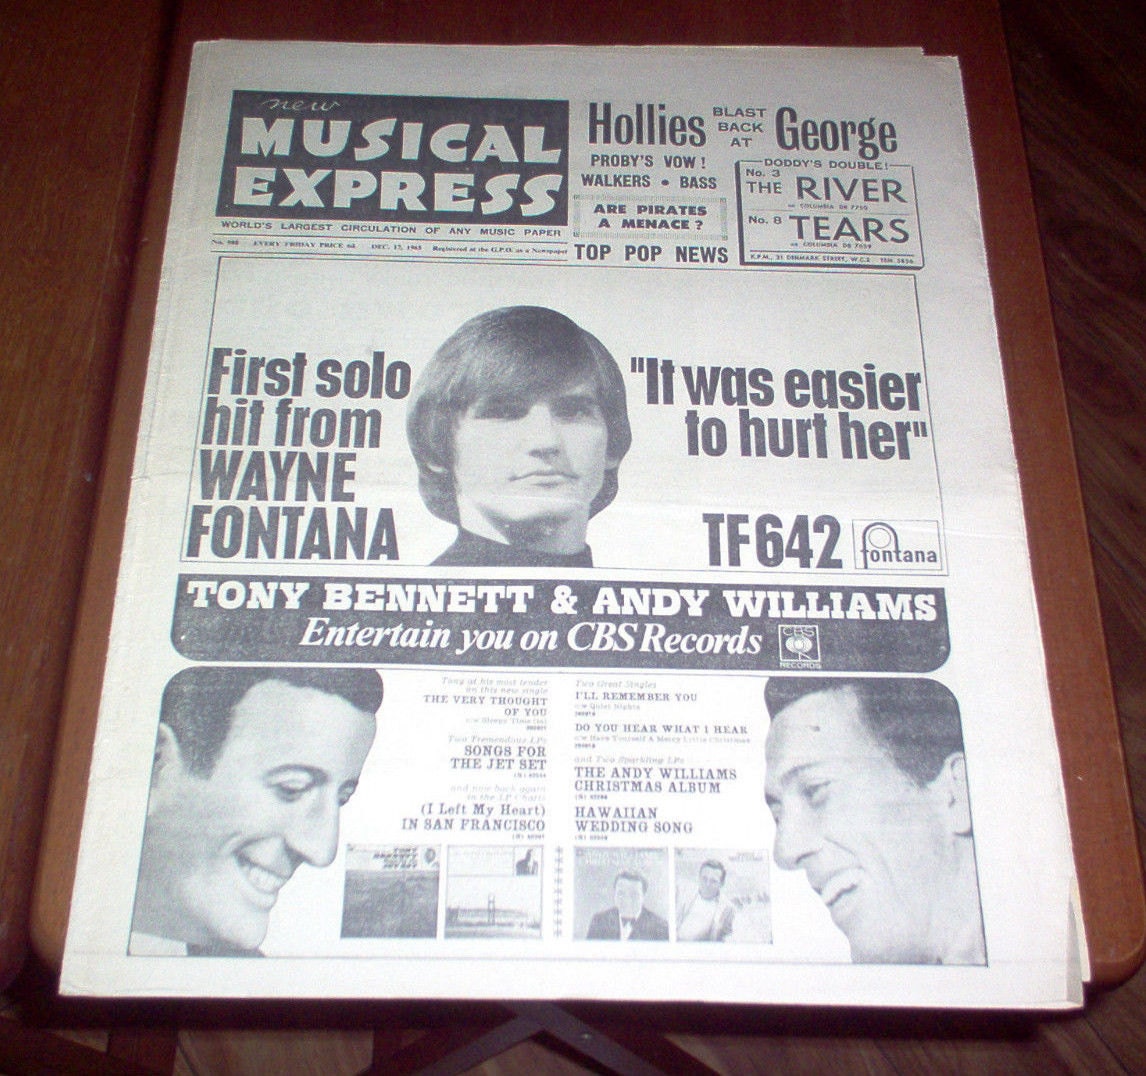 NME New Musical Express Magazine 1965 Music Beatles VS Hollies